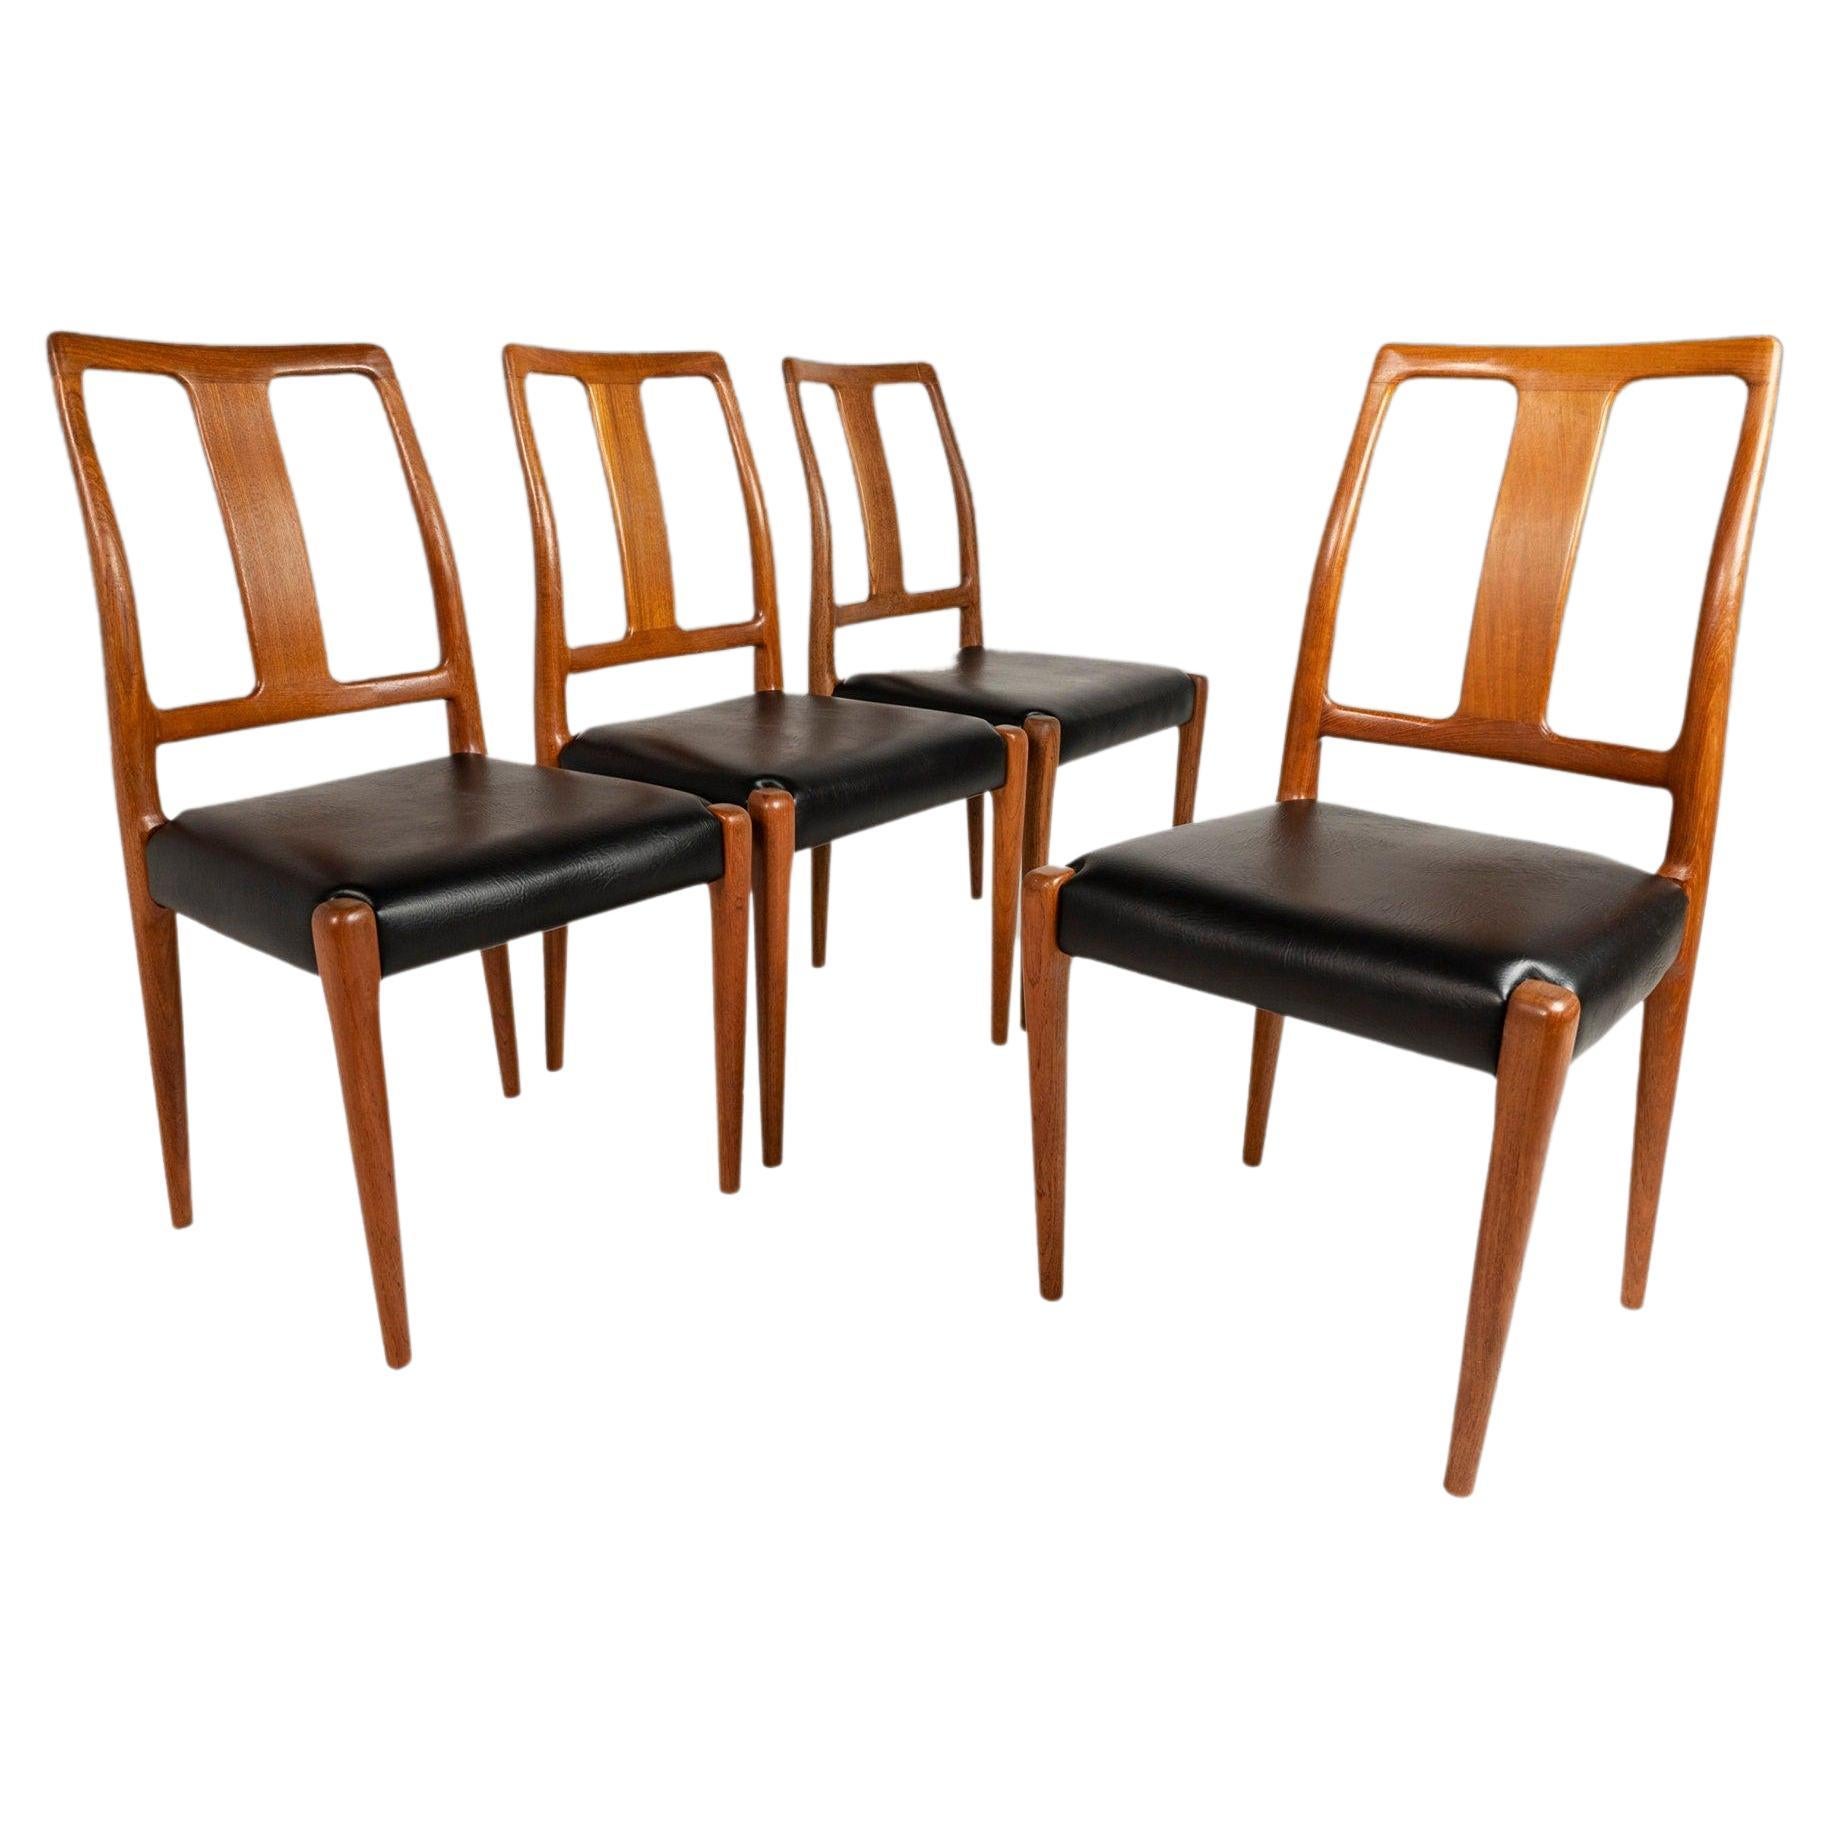 Set of Four '4' Teak Dining Chair by D-SCAN Newly Upholstered, c. 1970s